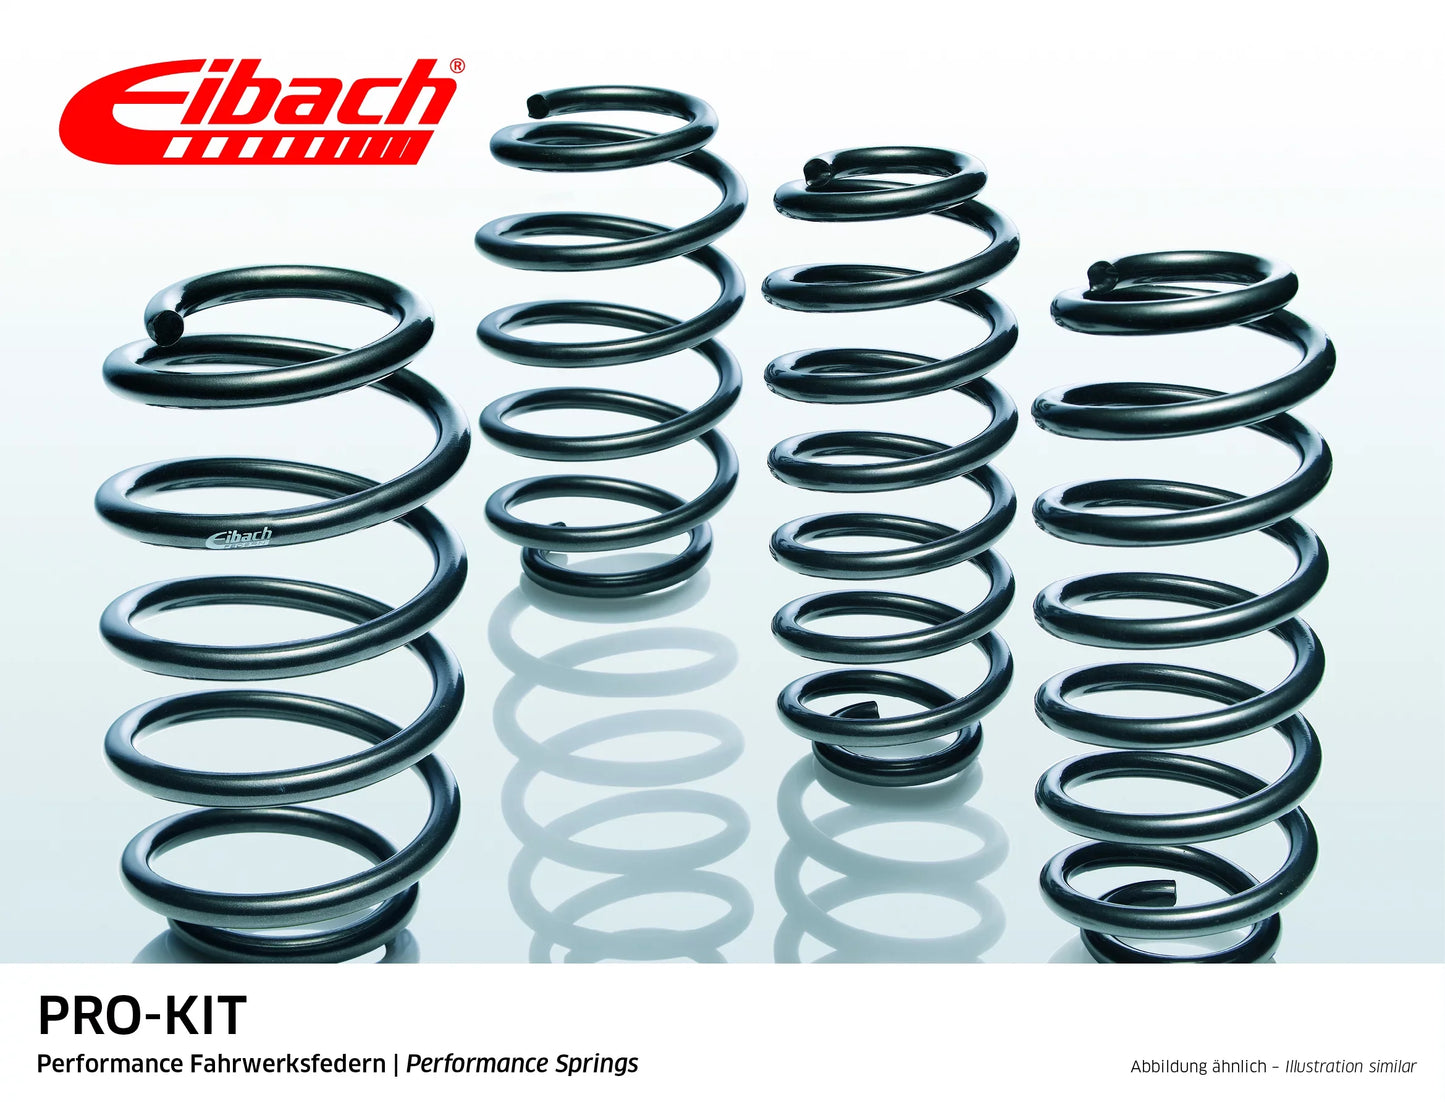 Eibach Pro-Kit Lowering Springs (E10-15-021-09-22) at £263.02